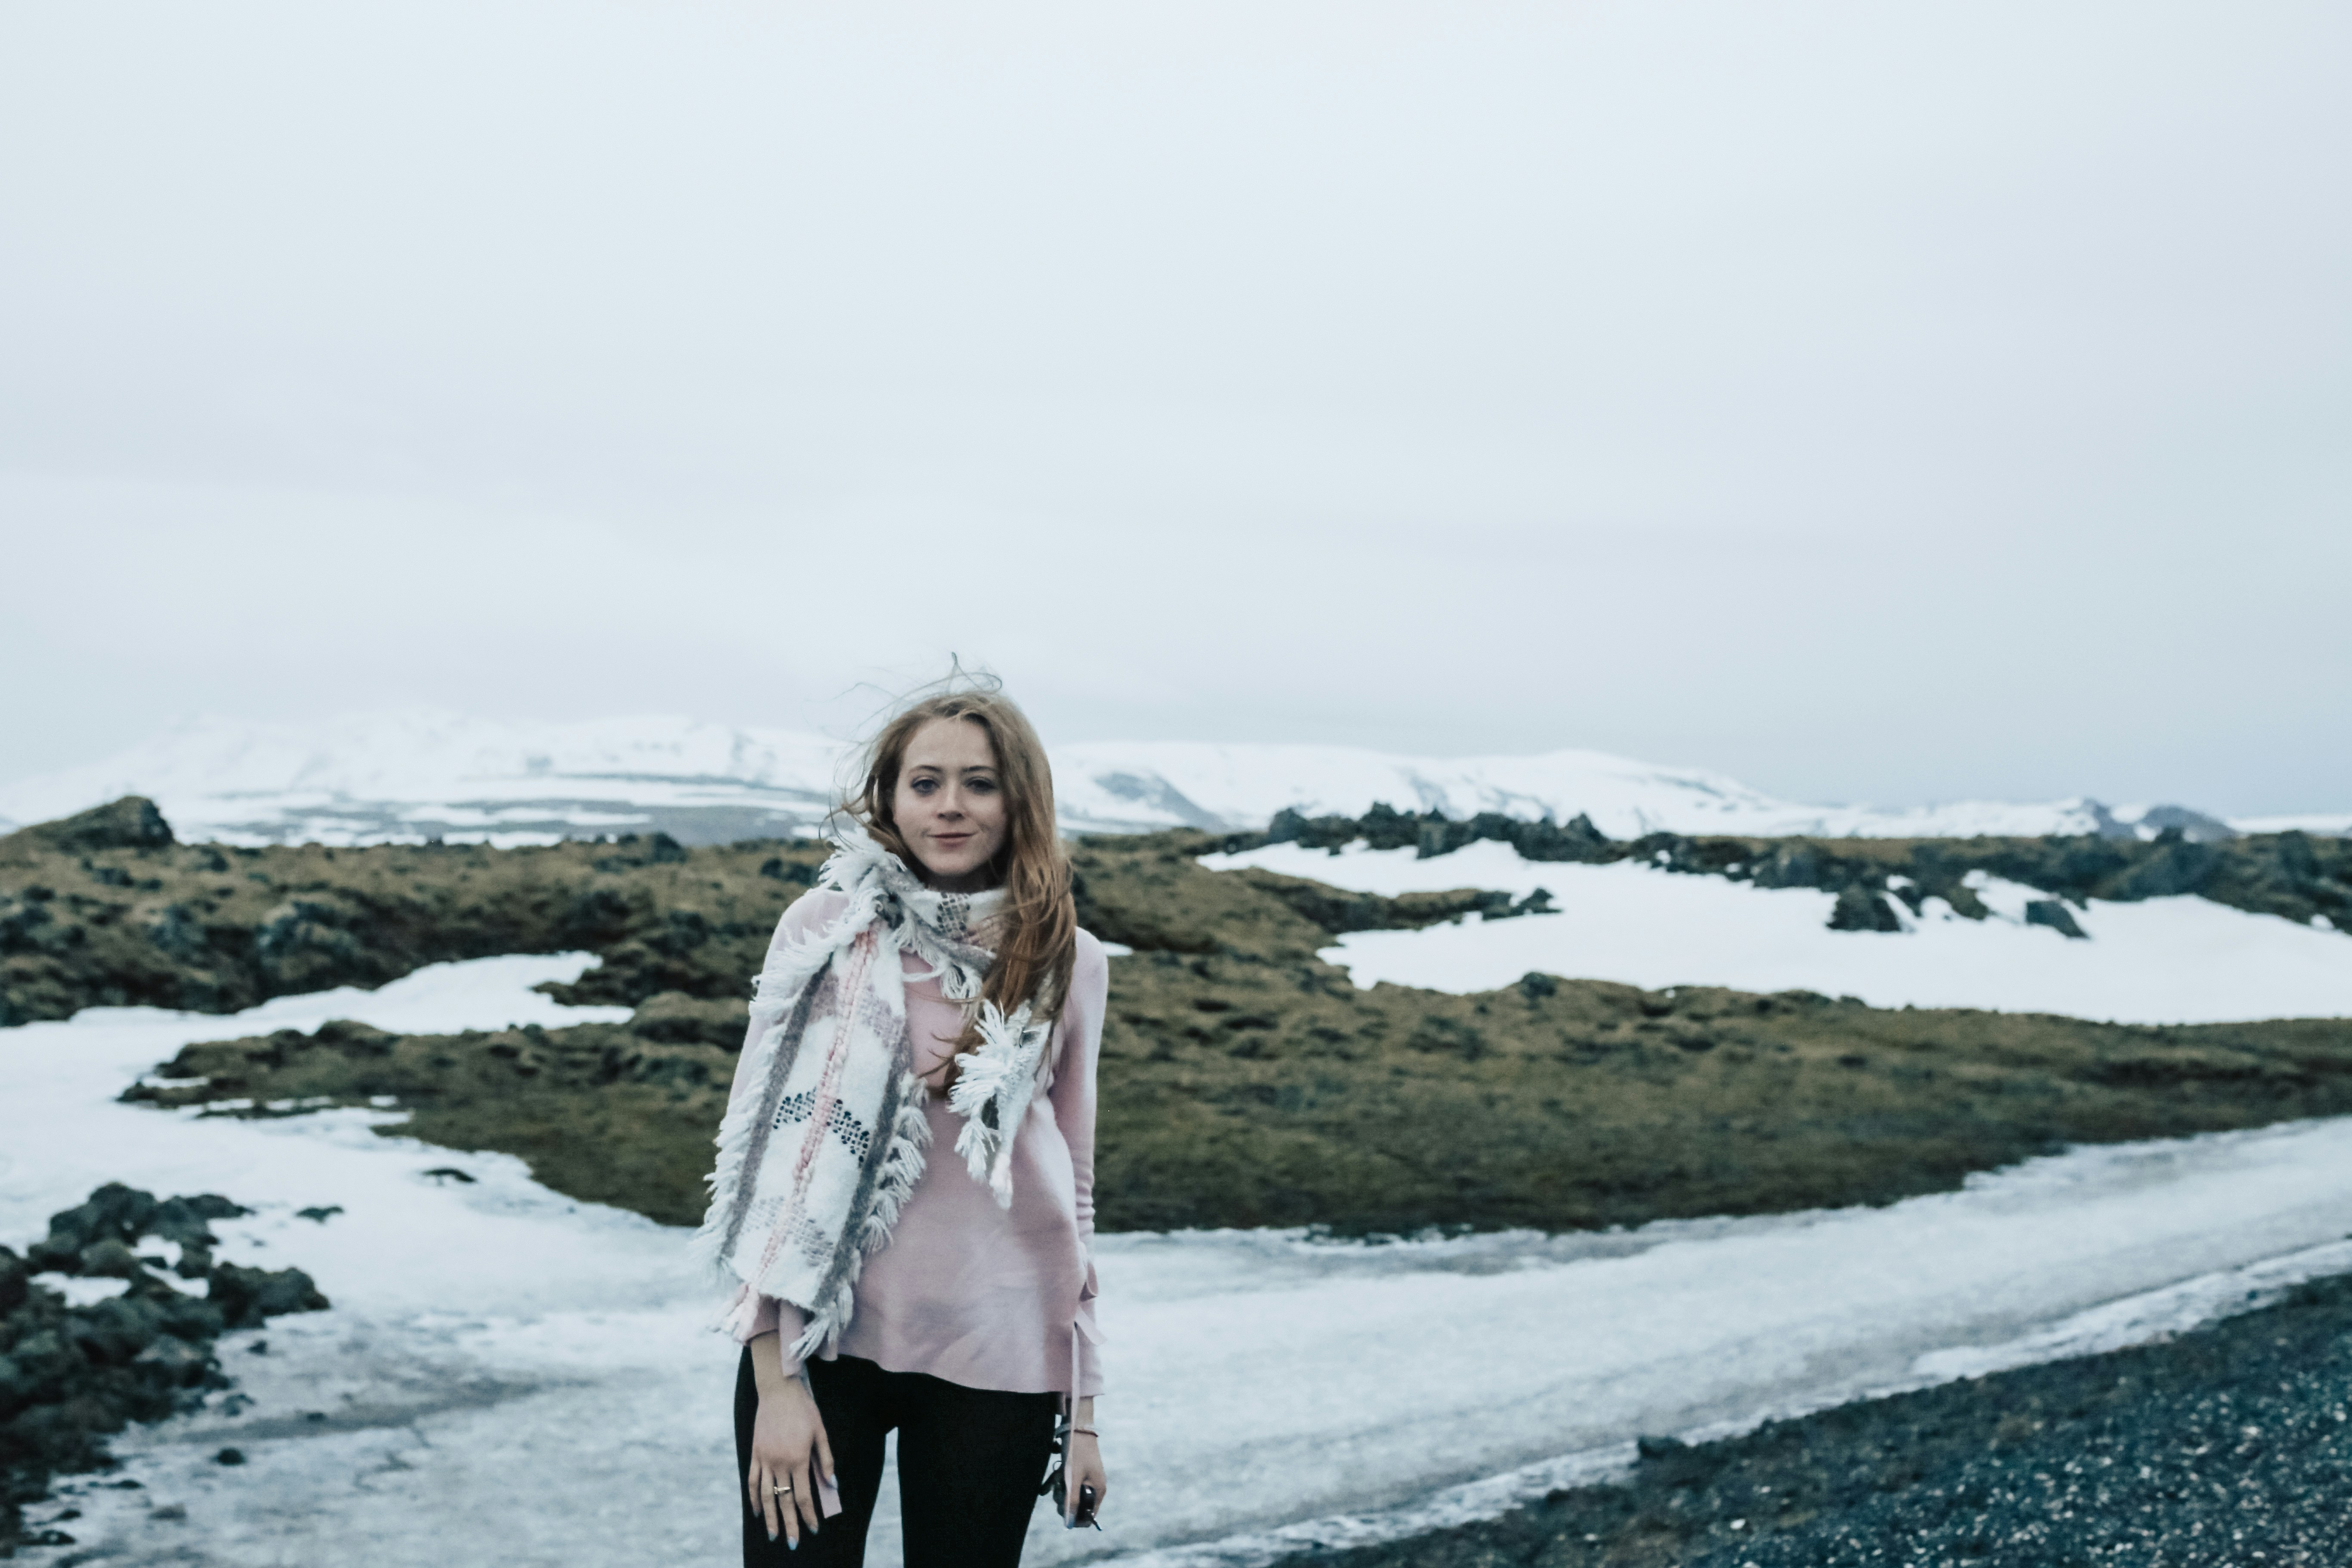 Last day in Iceland was spent exploring the South and Vik. With black sand beaches, waterfalls and culinary destinations, it was a trip that tested our driving skills, patience and rewarded us with amazing views and memories.